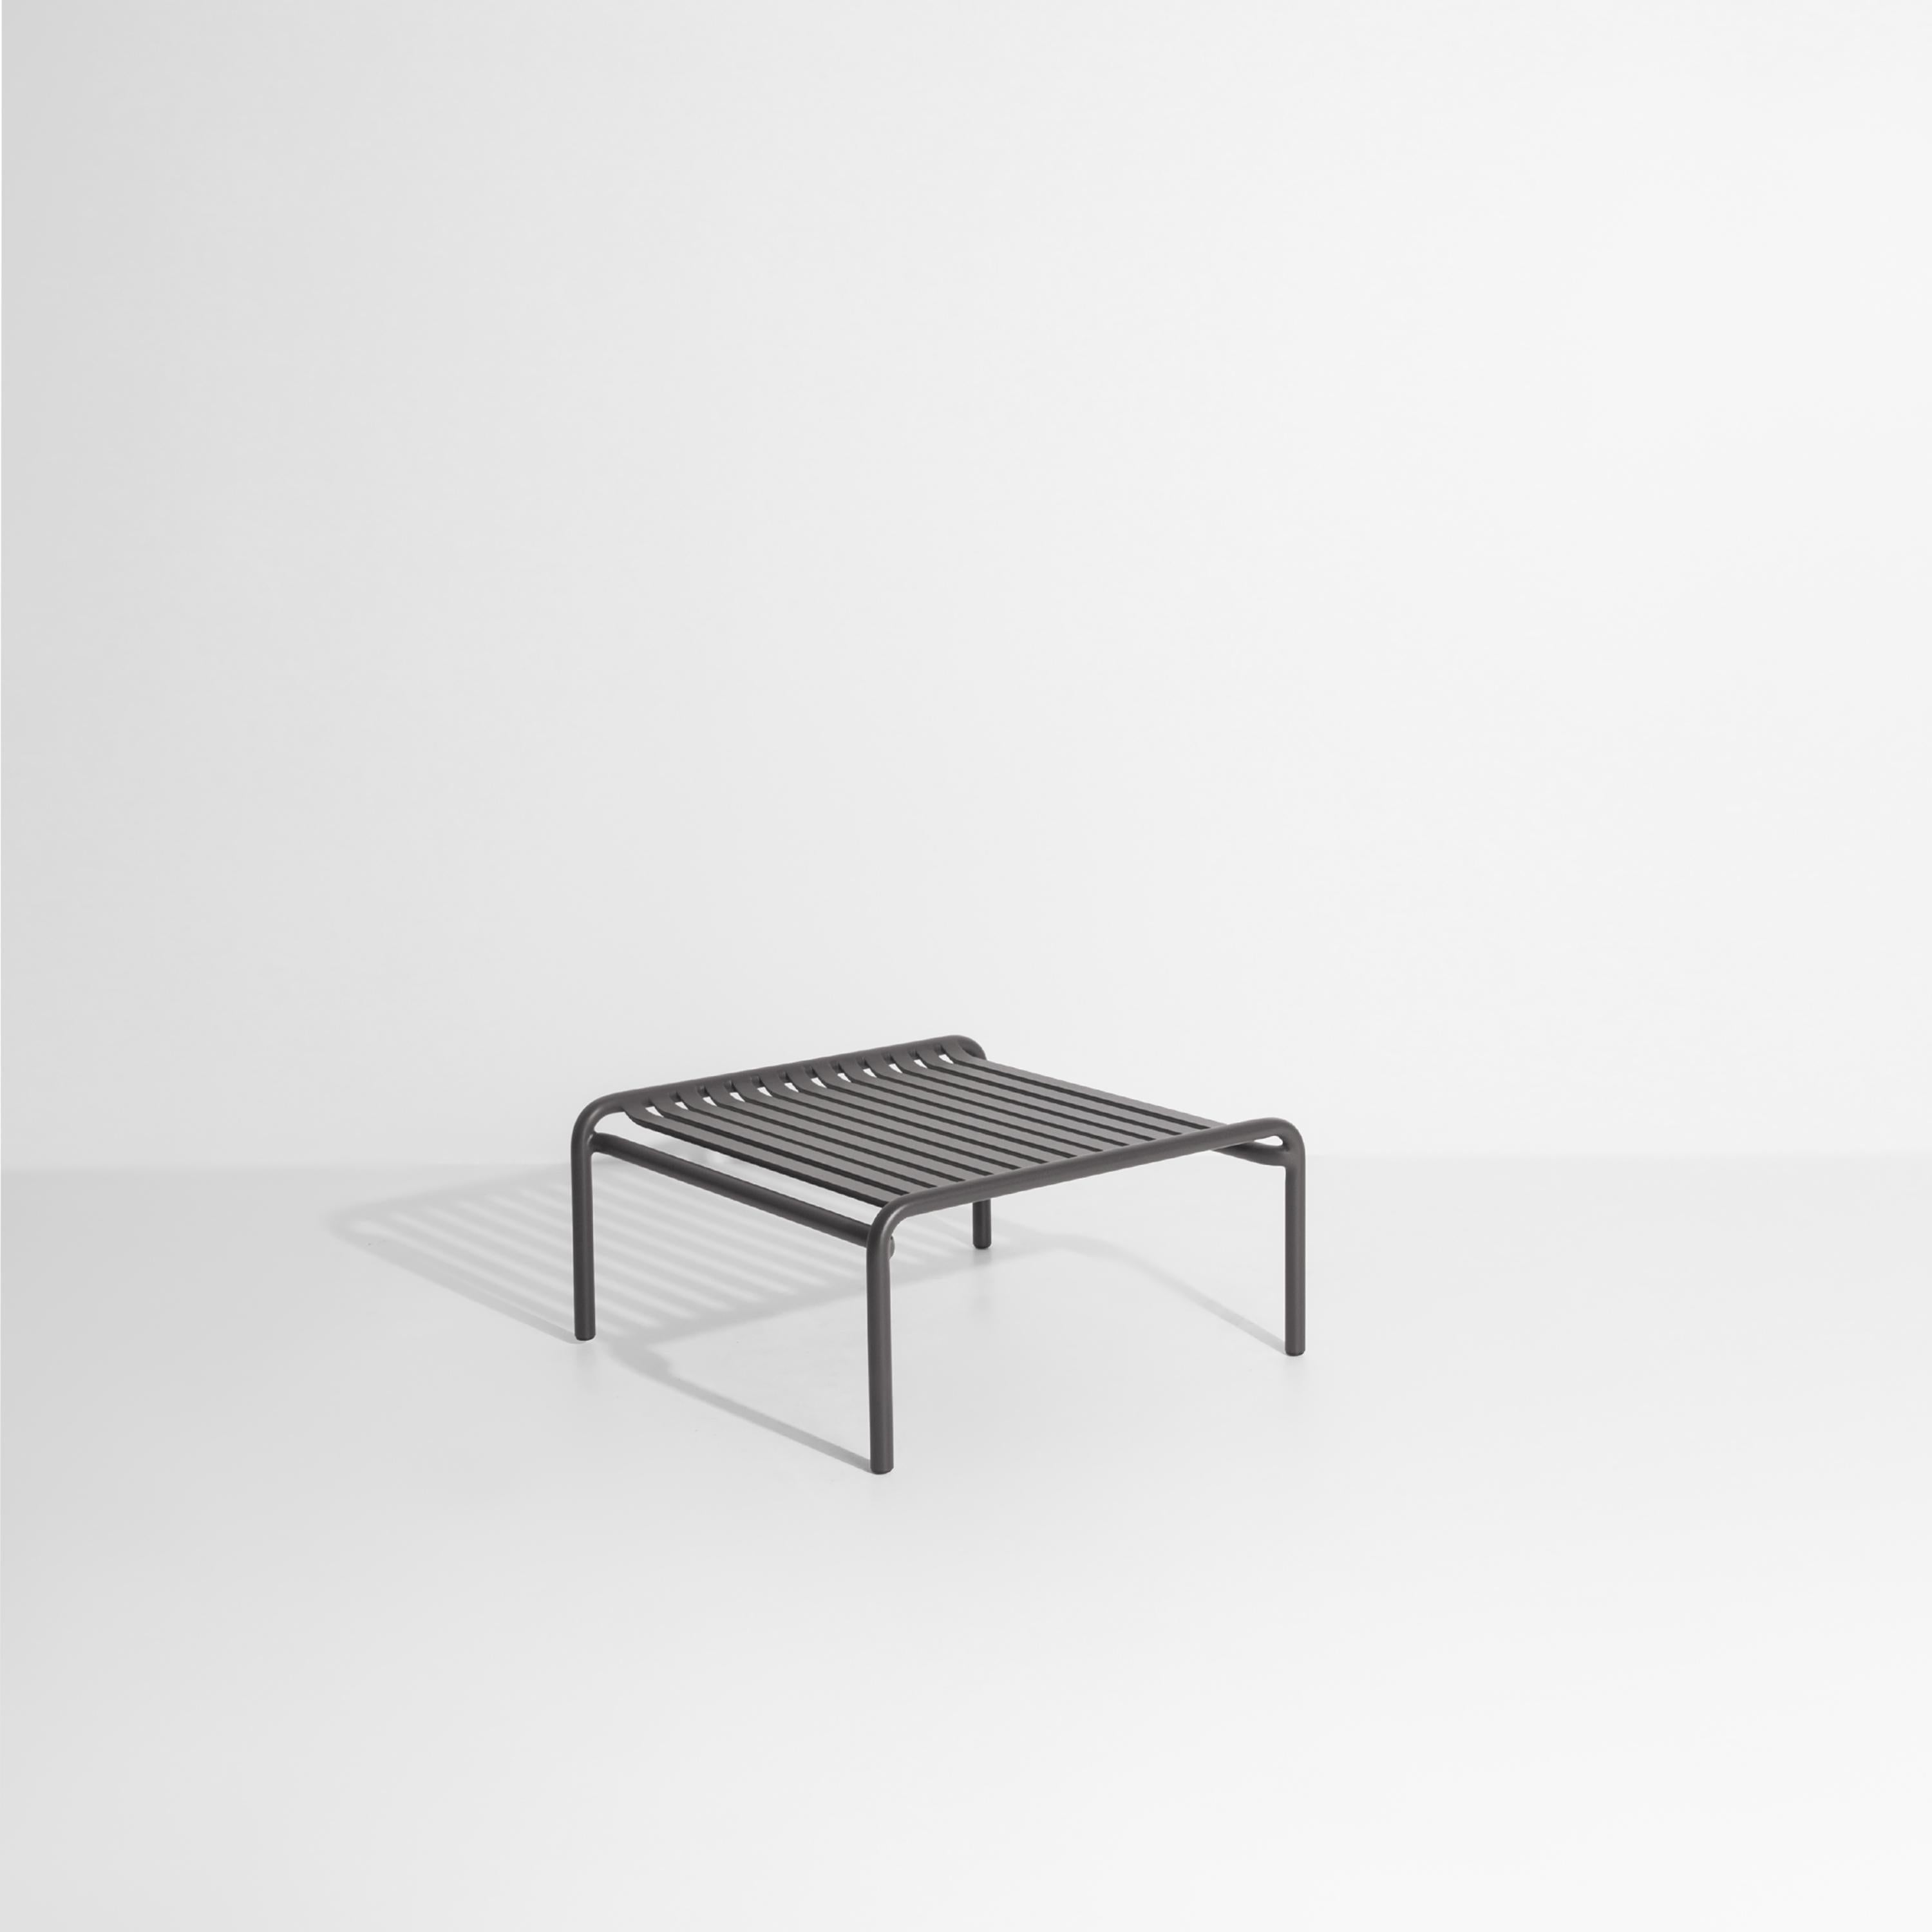 Petite Friture Week-End Coffee Table in Anthracite Aluminium by Studio BrichetZiegler, 2017

The week-end collection is a full range of outdoor furniture, in aluminium grained epoxy paint, matt finish, that includes 18 functions and 8 colours for